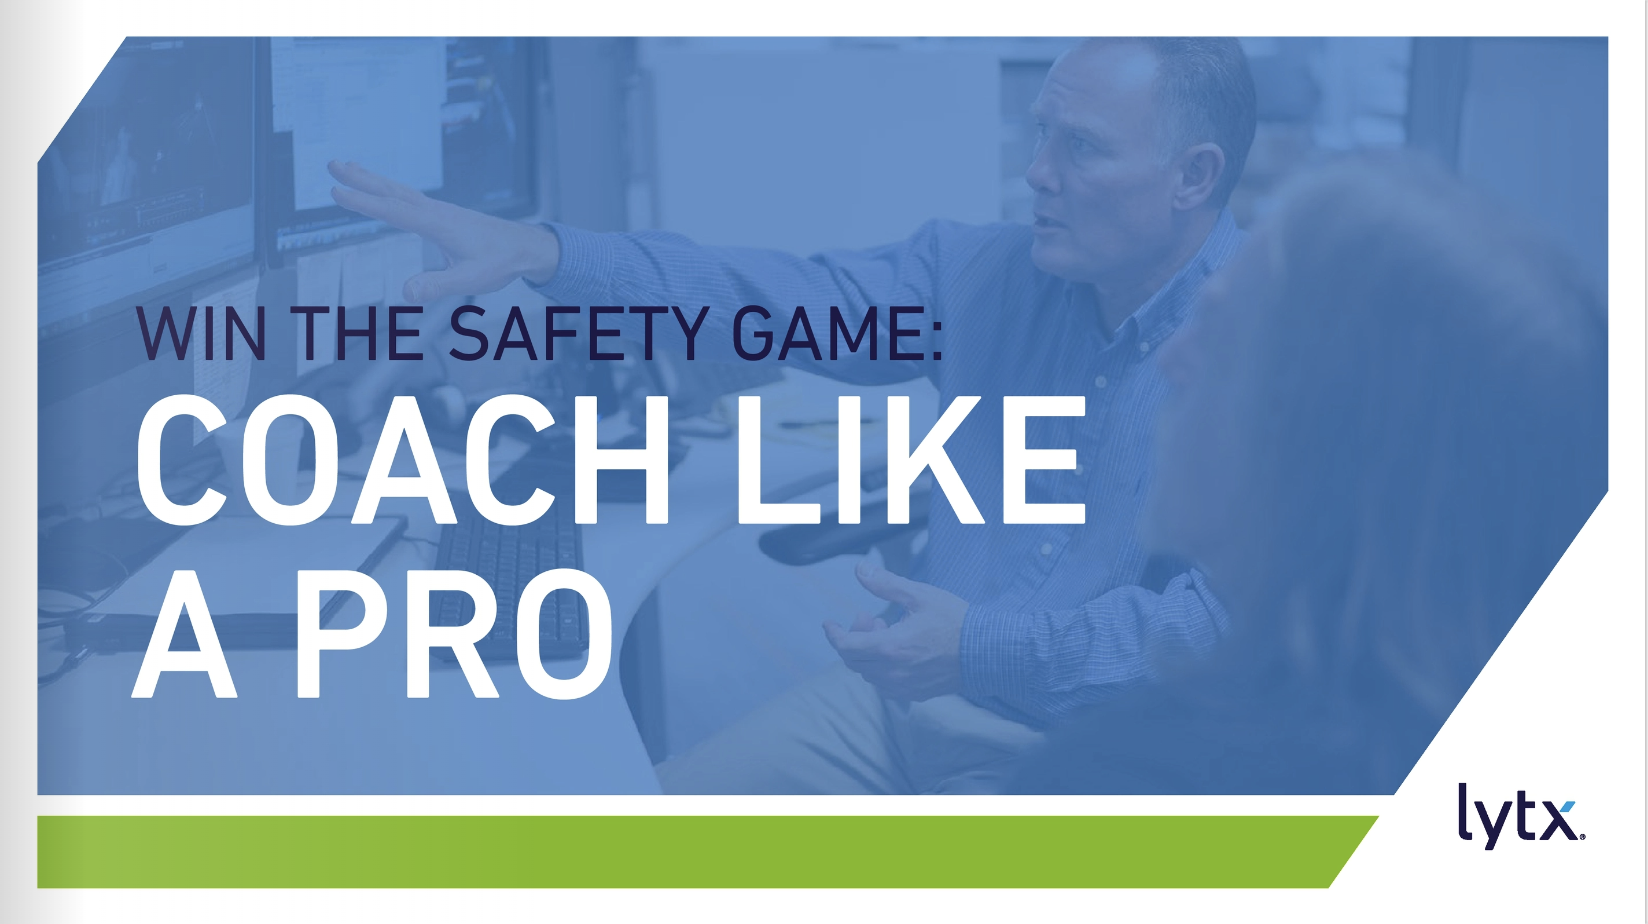 "Win the safety game: Coach like a pro"